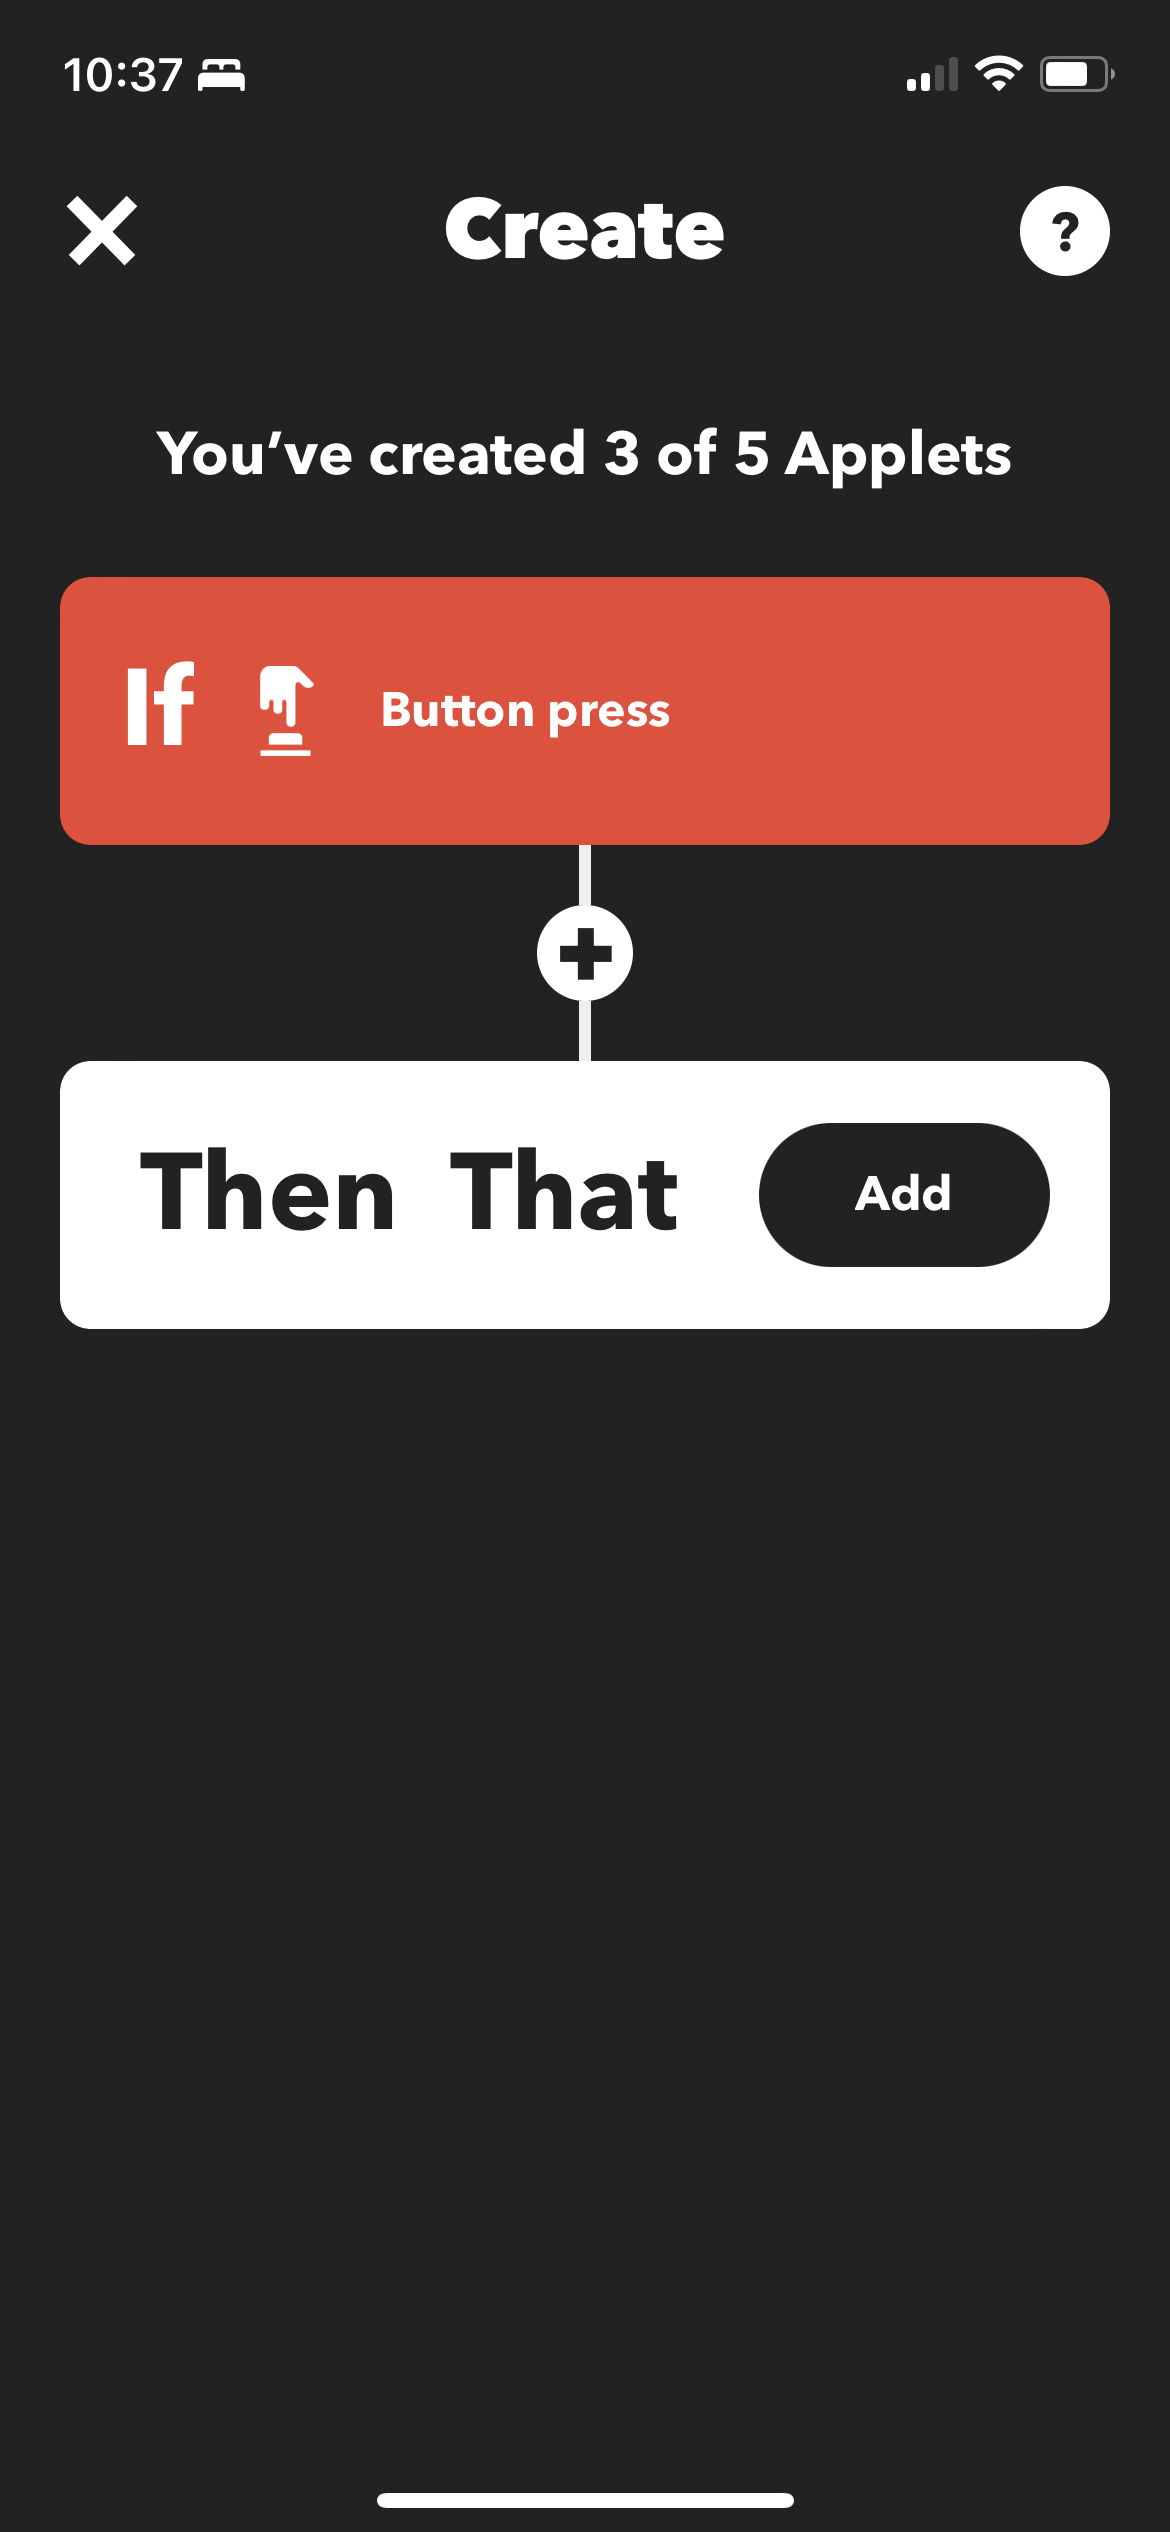 A screenshot of the IFTT create Applet Workflow, with the 'IF' section filled with the button press widget.